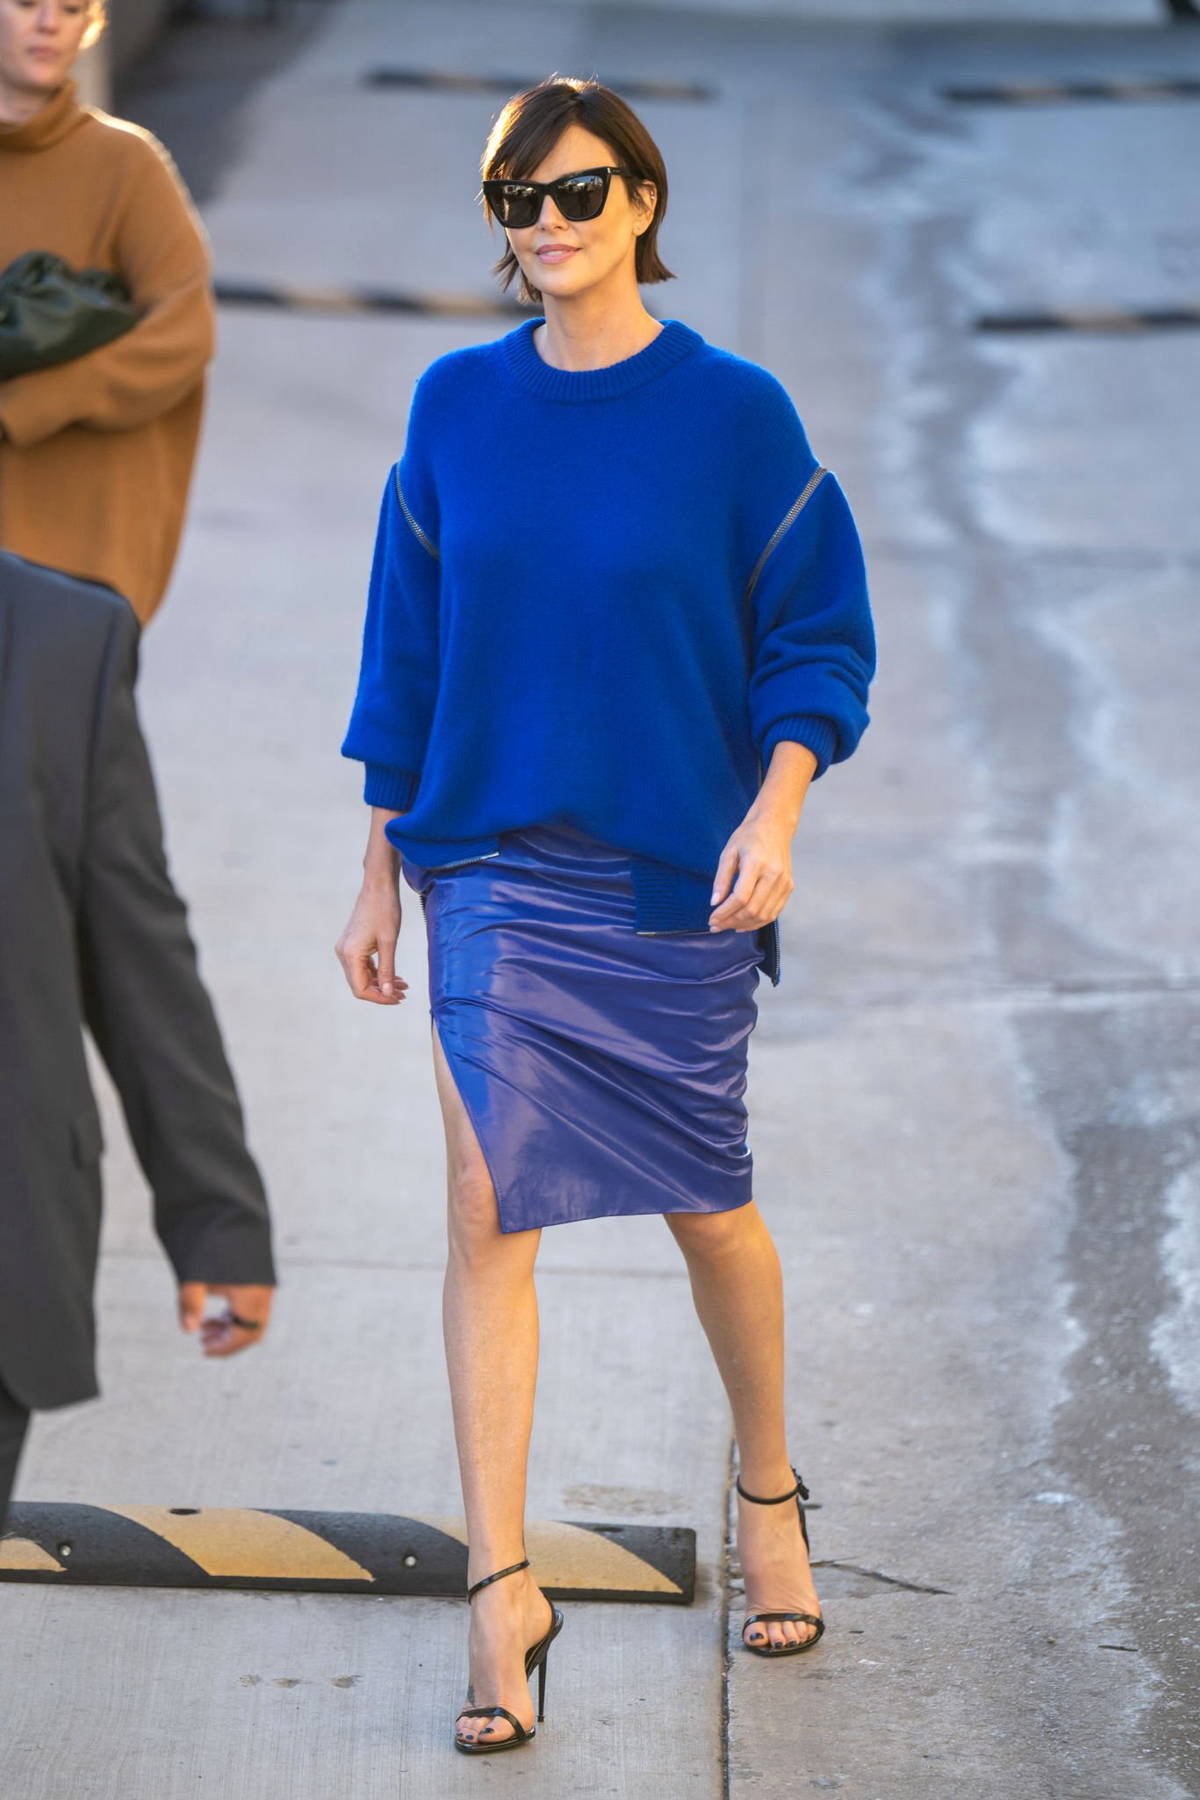 Charlize Theron goes casual chic in navy blue at celebrity hotspot